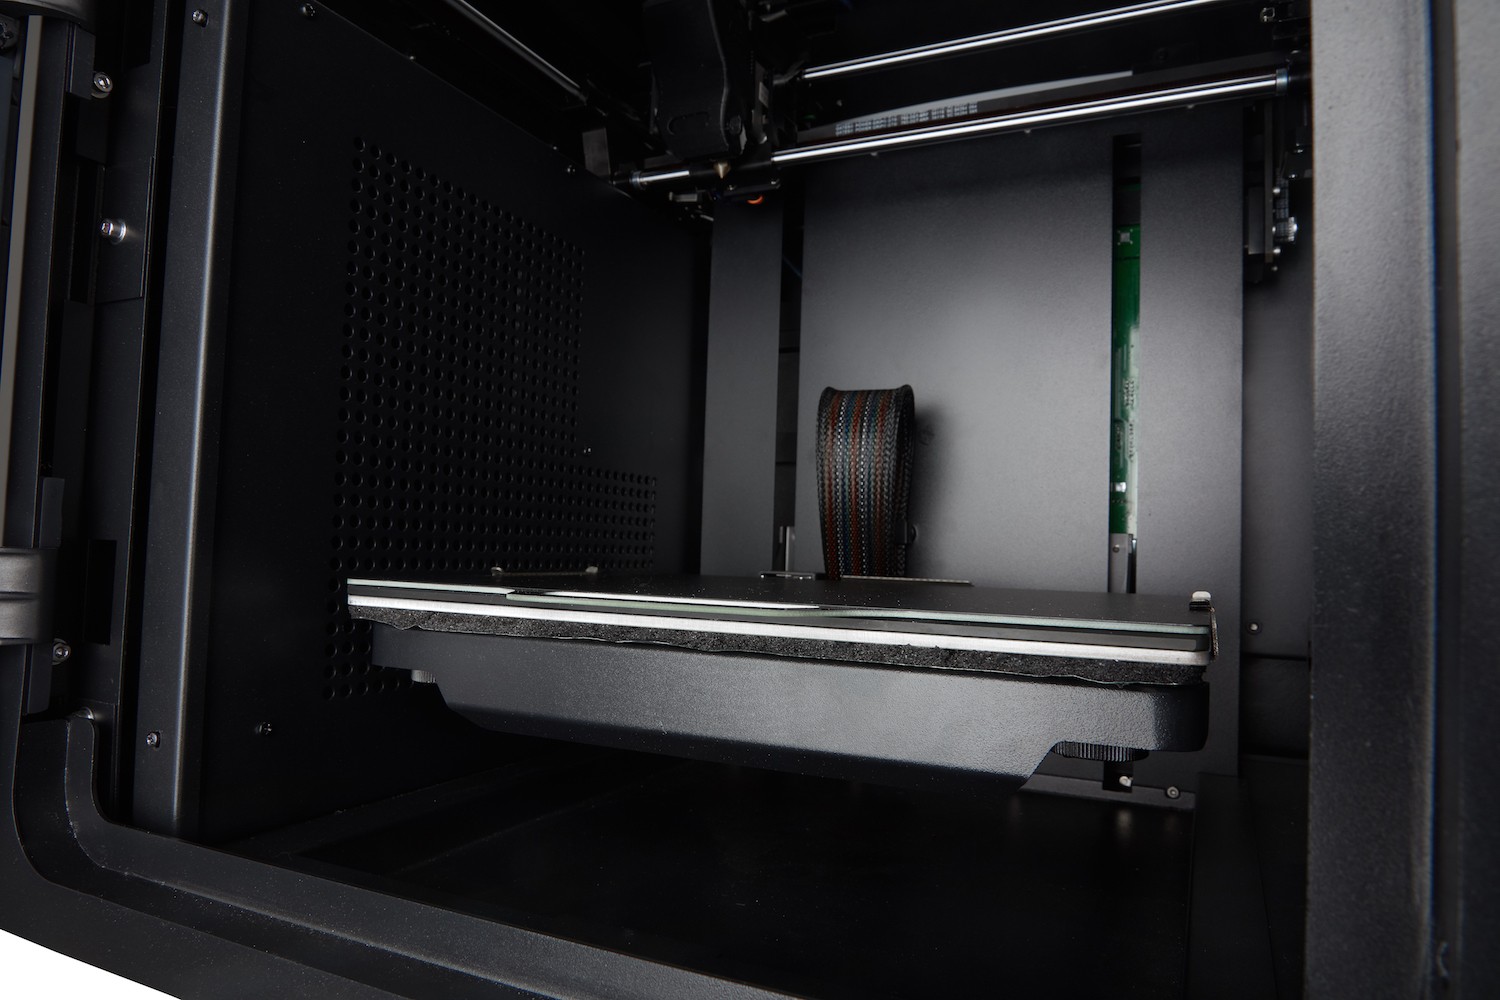 The UP300 has an expansive build area, allowing for extra creativity or the printing of multiple smaller parts at once.